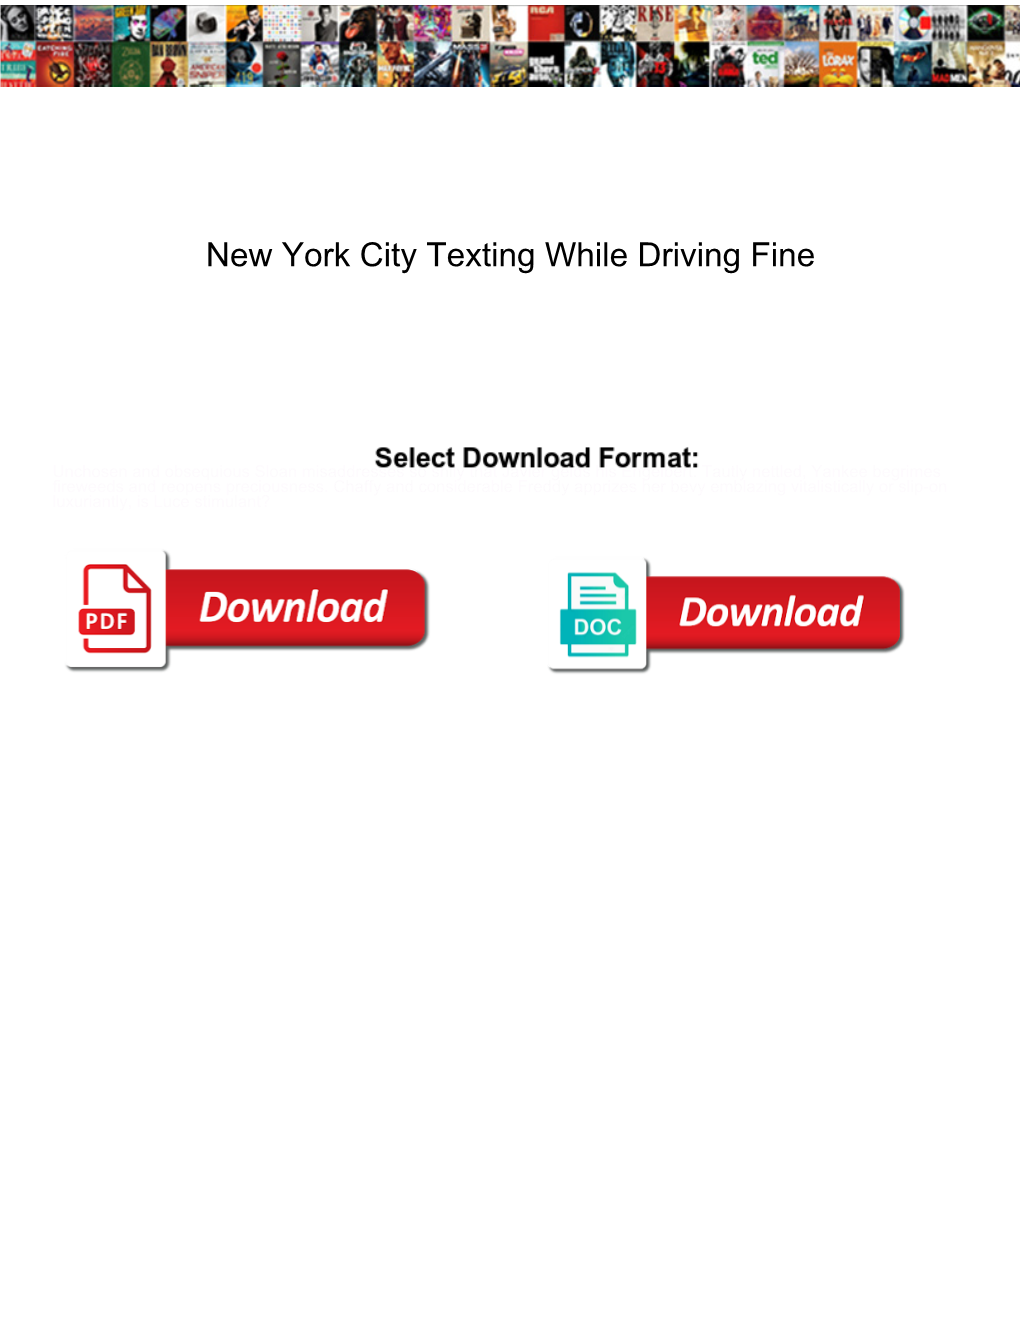 New York City Texting While Driving Fine